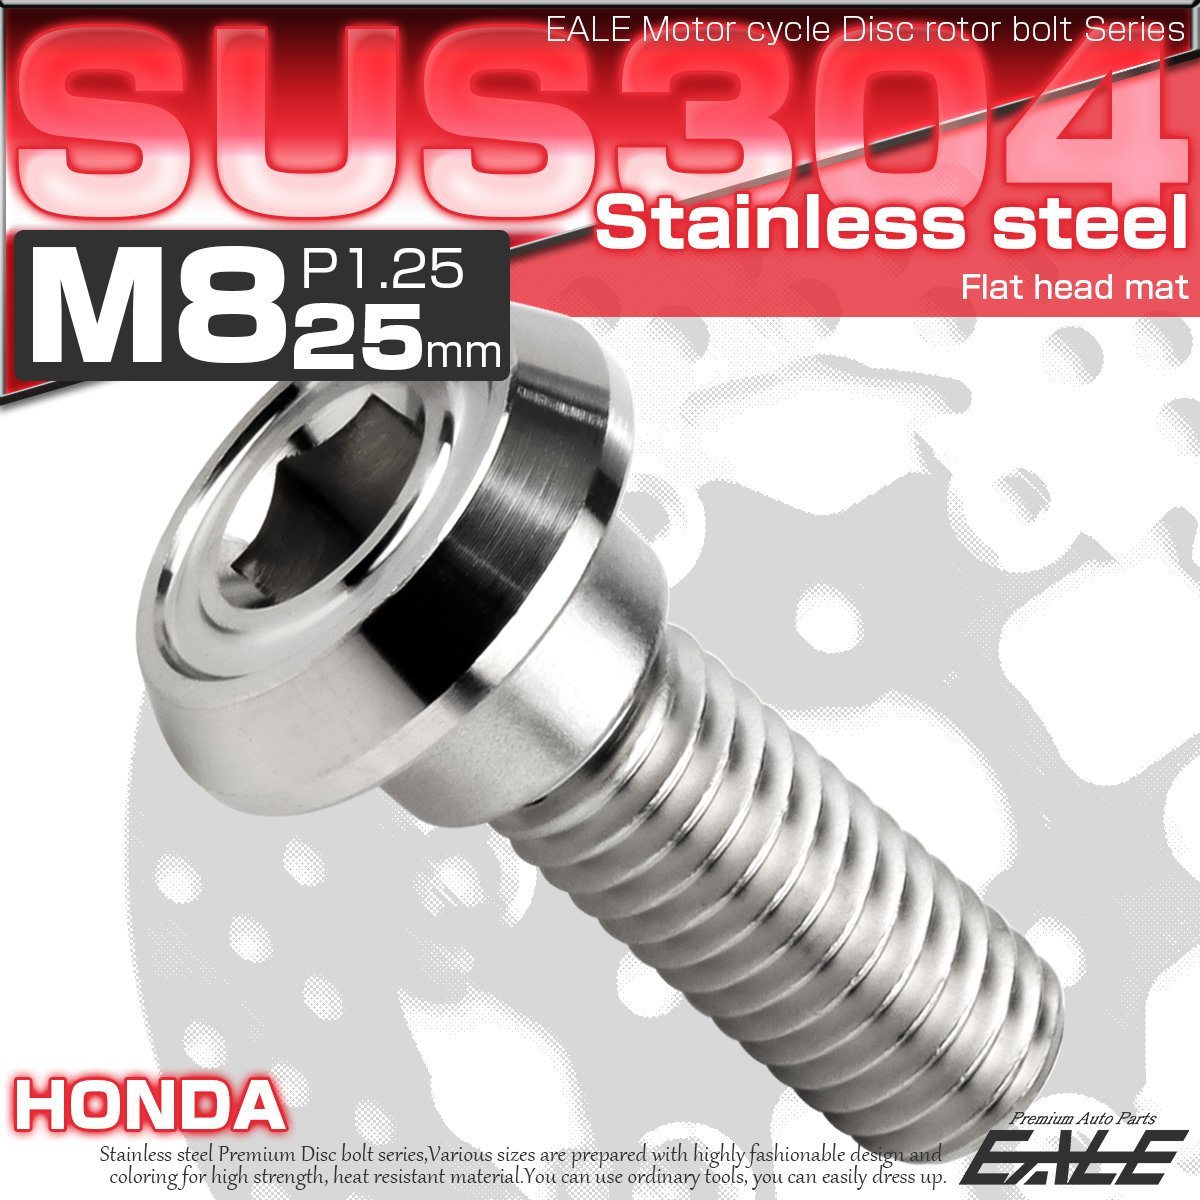  brake disk rotor bolt Honda for M8×25mm P=1.25 stainless steel Flat Head mat type AA silver TD0201